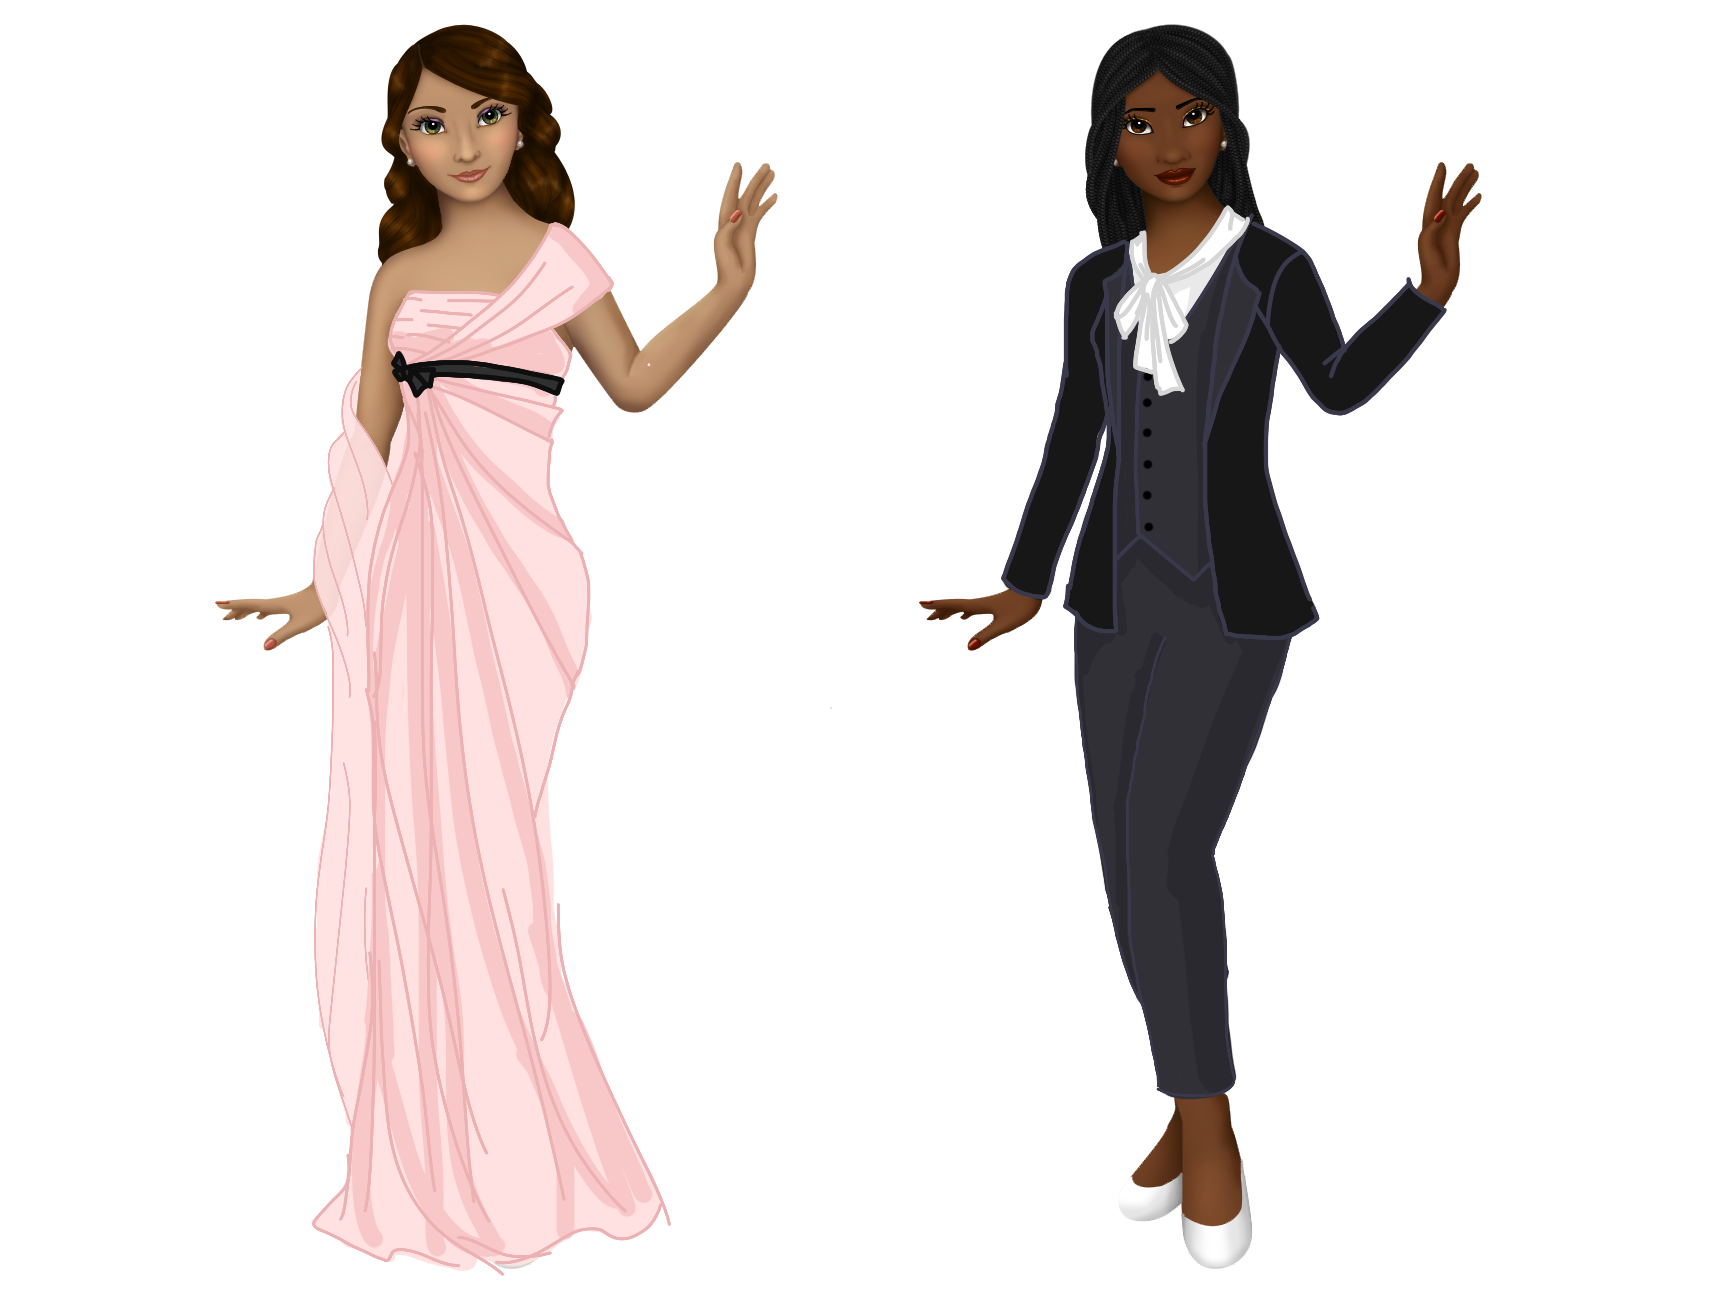 Dresses for Penelope Cruz and Ellen DeGeneres. Peneleope's dress is pink and sleeveless with an empire waist. A length of pink fabric starts at the black ribbon under the bust and goes over the shoulder, falling behind her and draping over her arm like a shawl. Ellen is wearing a black velvet jacket, a vest and pants with a thin white scarf tied in a droopy bow.